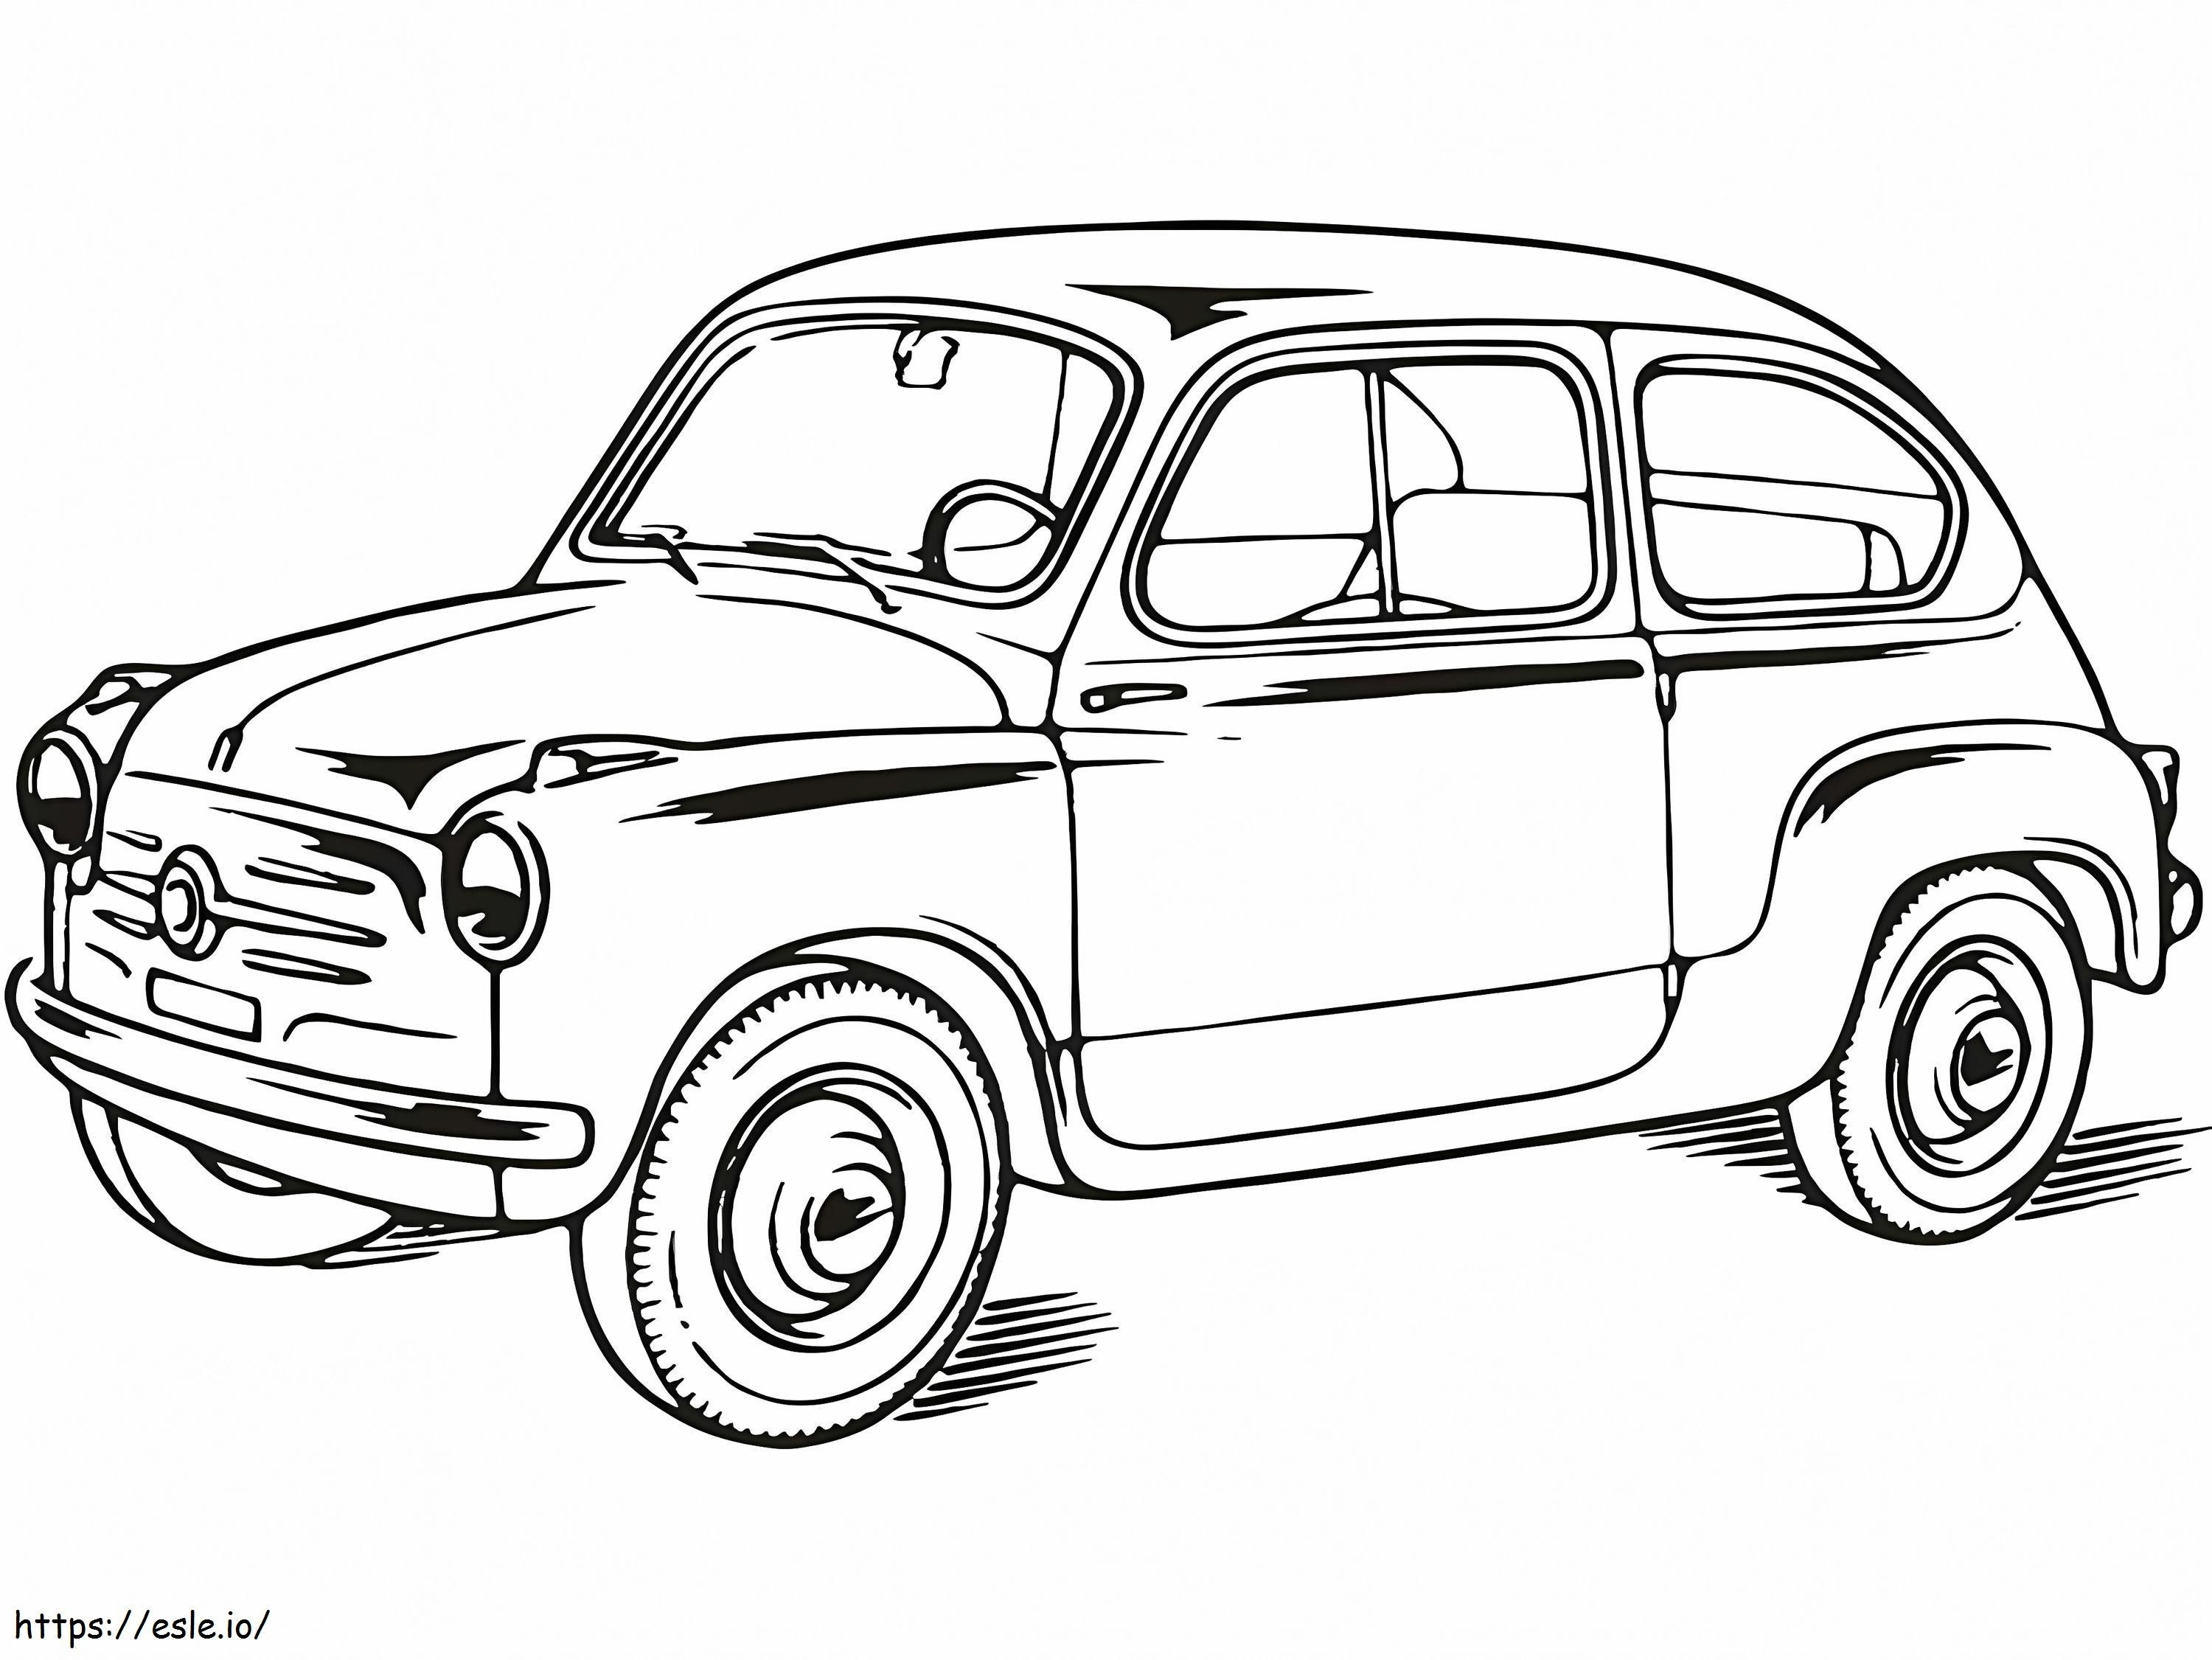 Fiat 600 coloring page